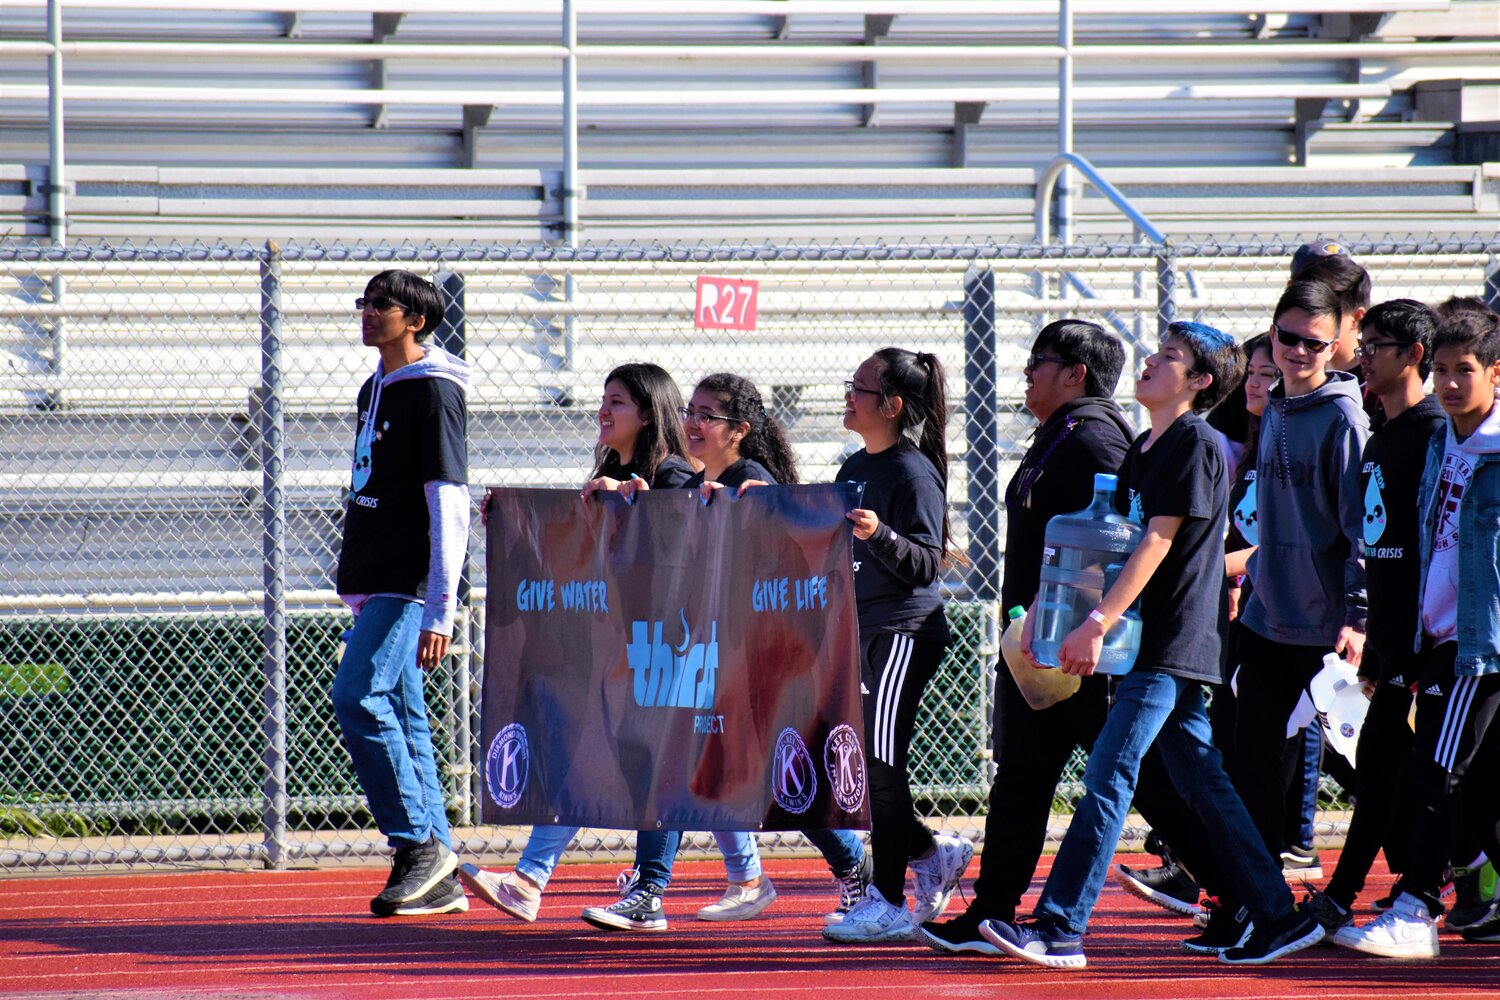 Downey students hope to raise $24,000 at Walk for Water - The Downey Patriot